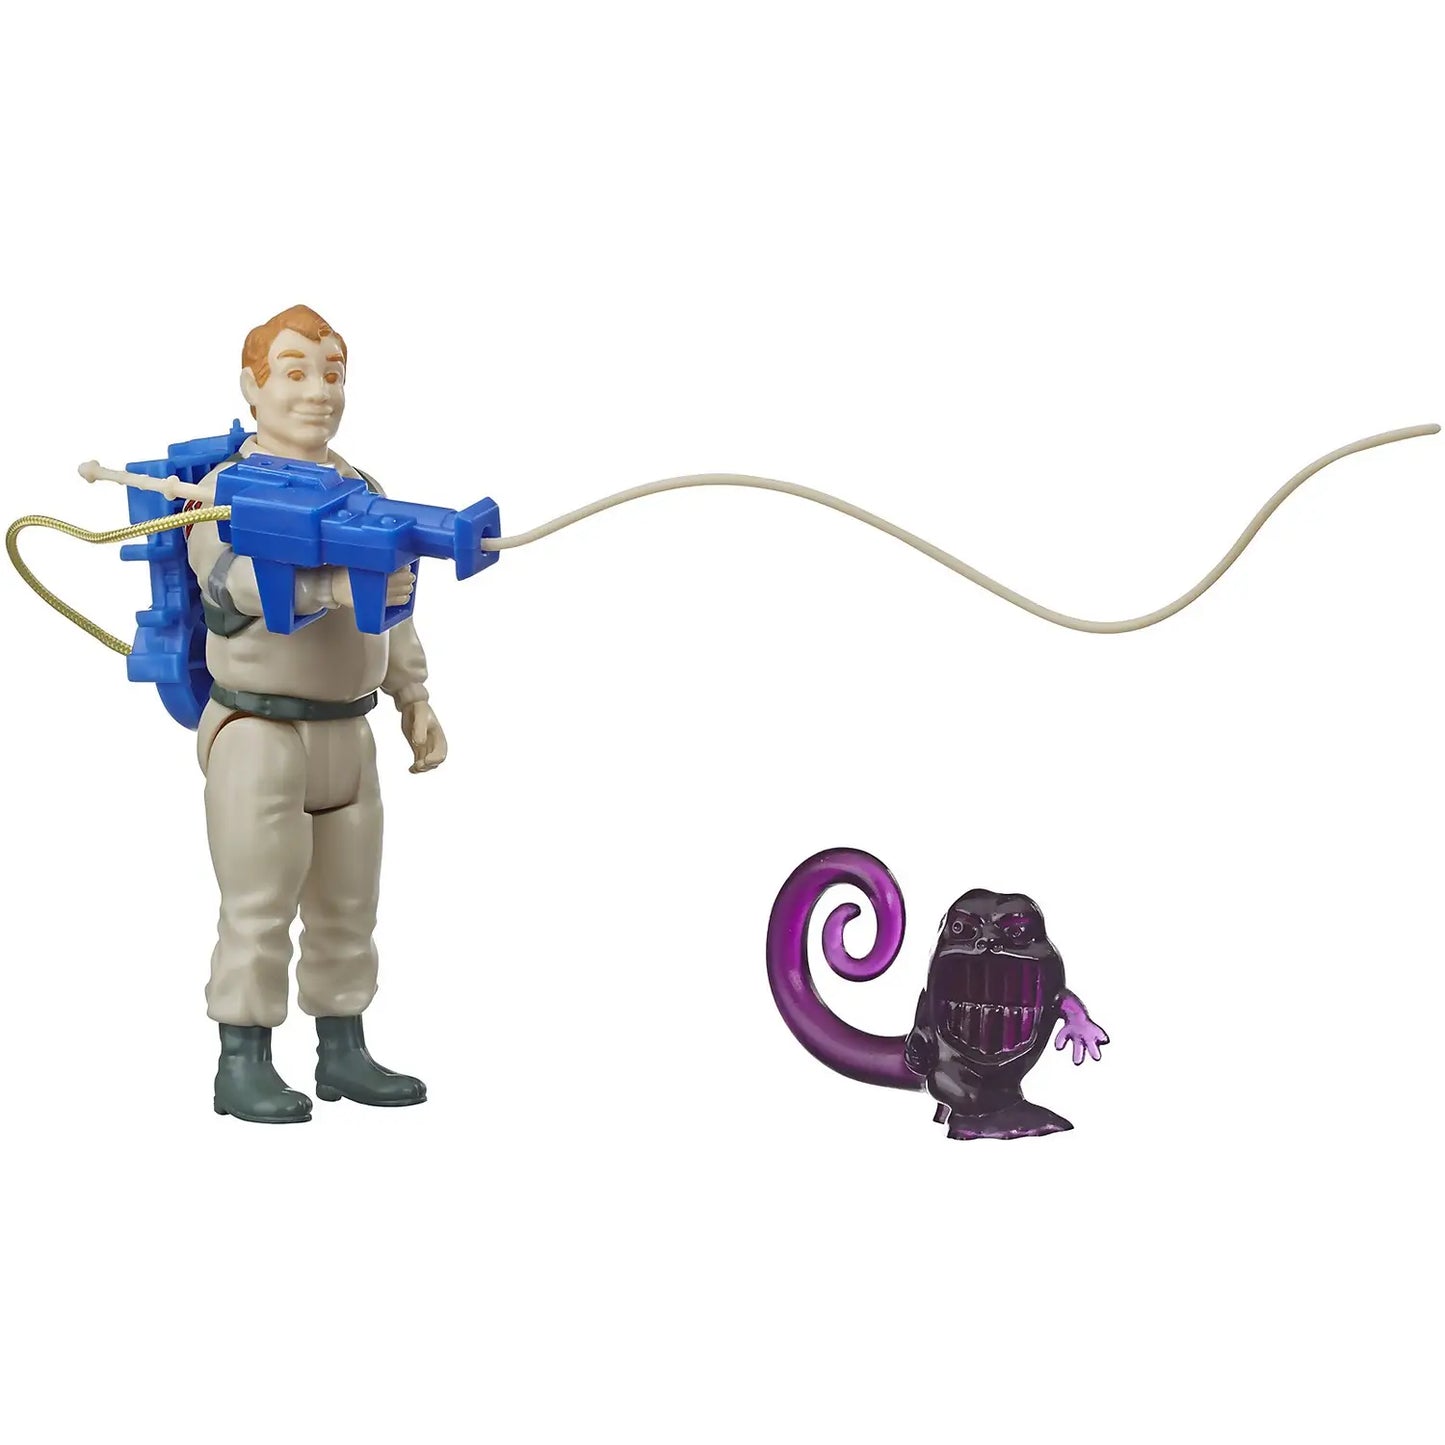 HASBRO GHOSTBUSTERS KENNER CLASSICS RAY STANTZ AND WRAPPER GHOST RETRO ACTION FIGURE